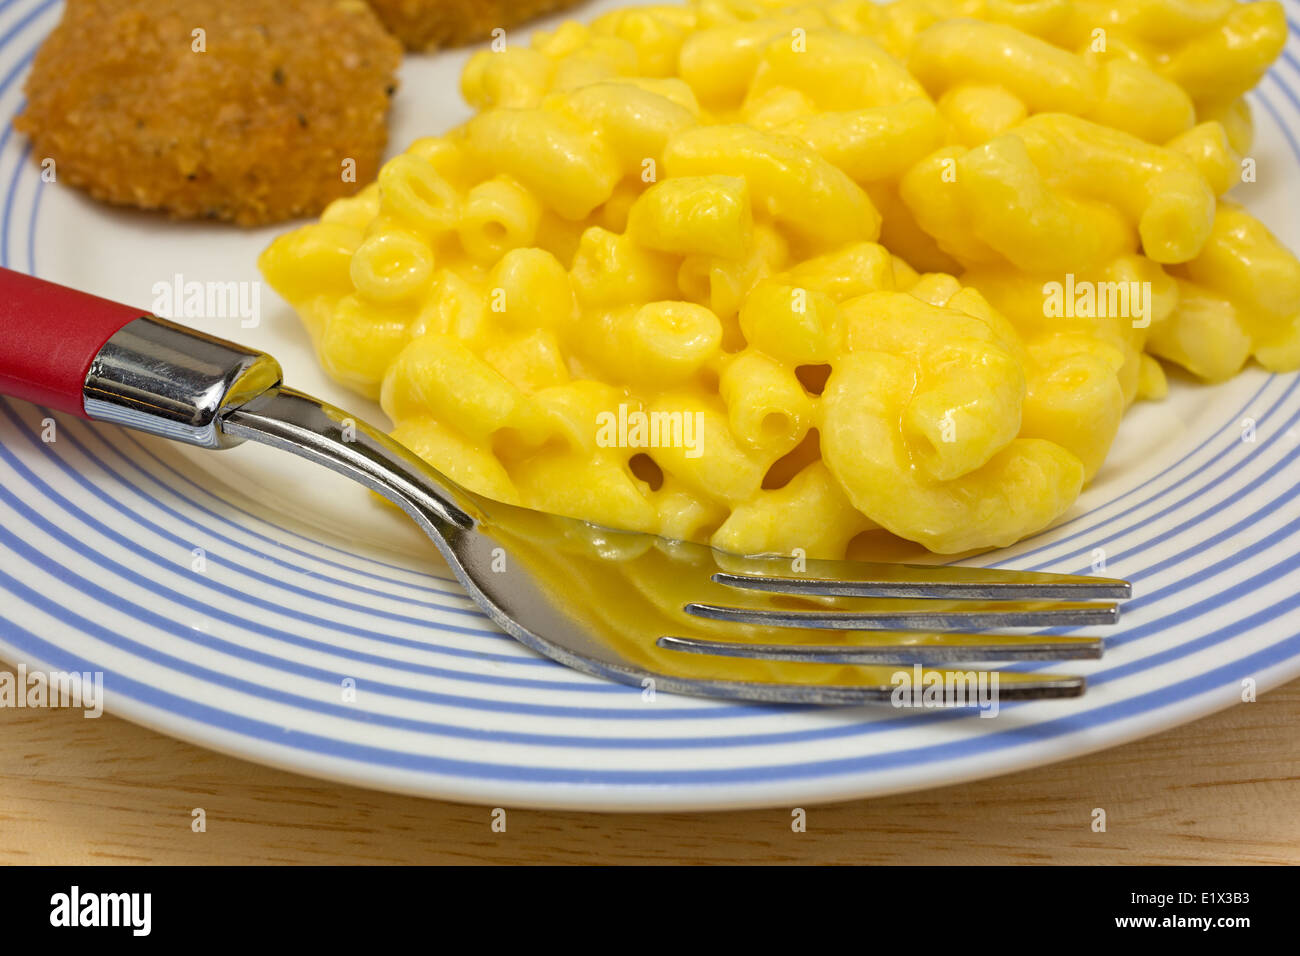 Close view of a meal of chicken nuggets with macaroni and cheese on a plate with fork. Stock Photo